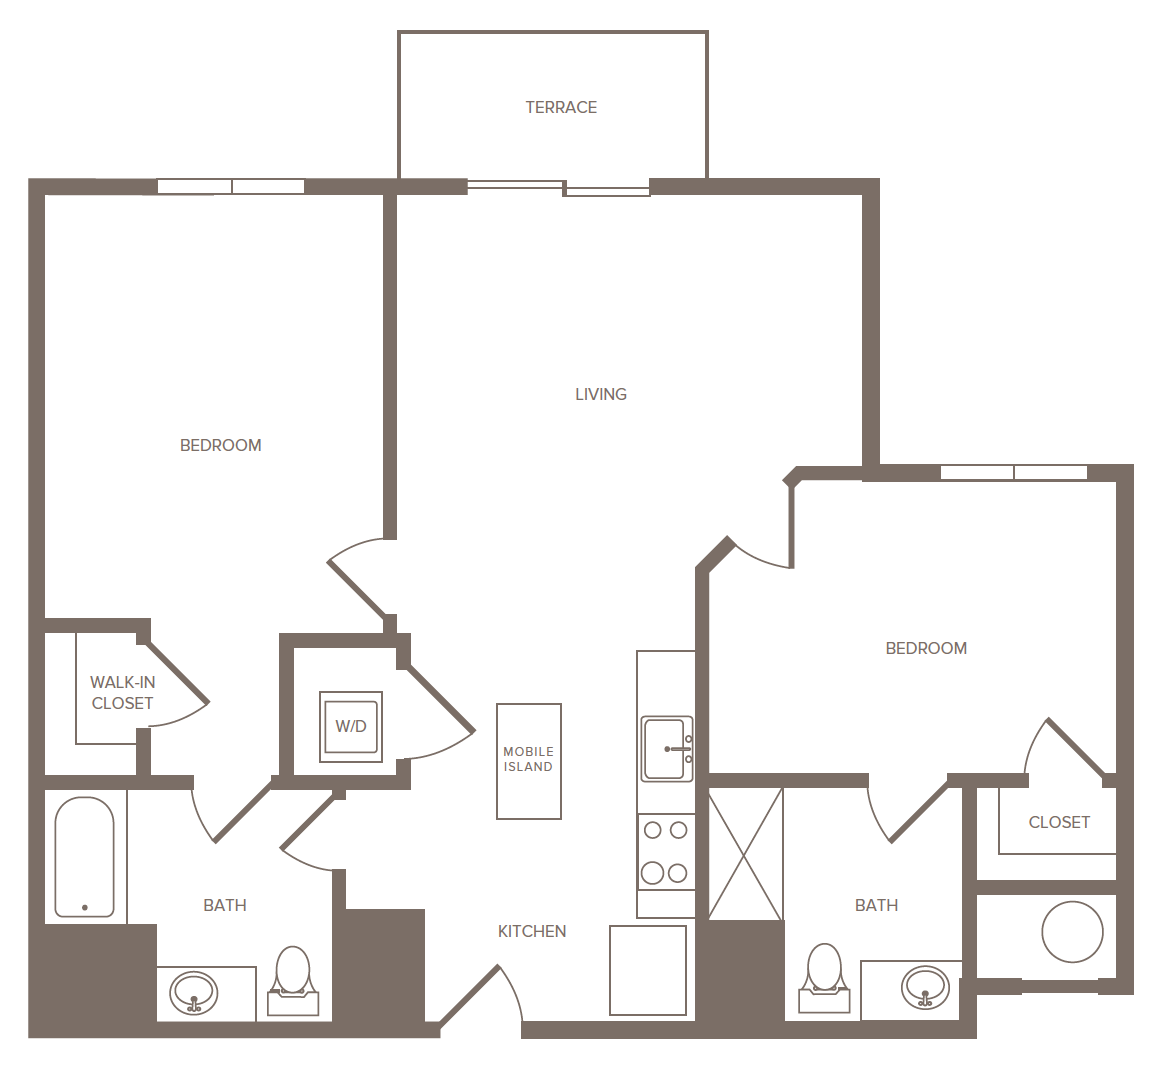 Floorplan for Apartment #1443, 2 bedroom unit at Halstead Parsippany